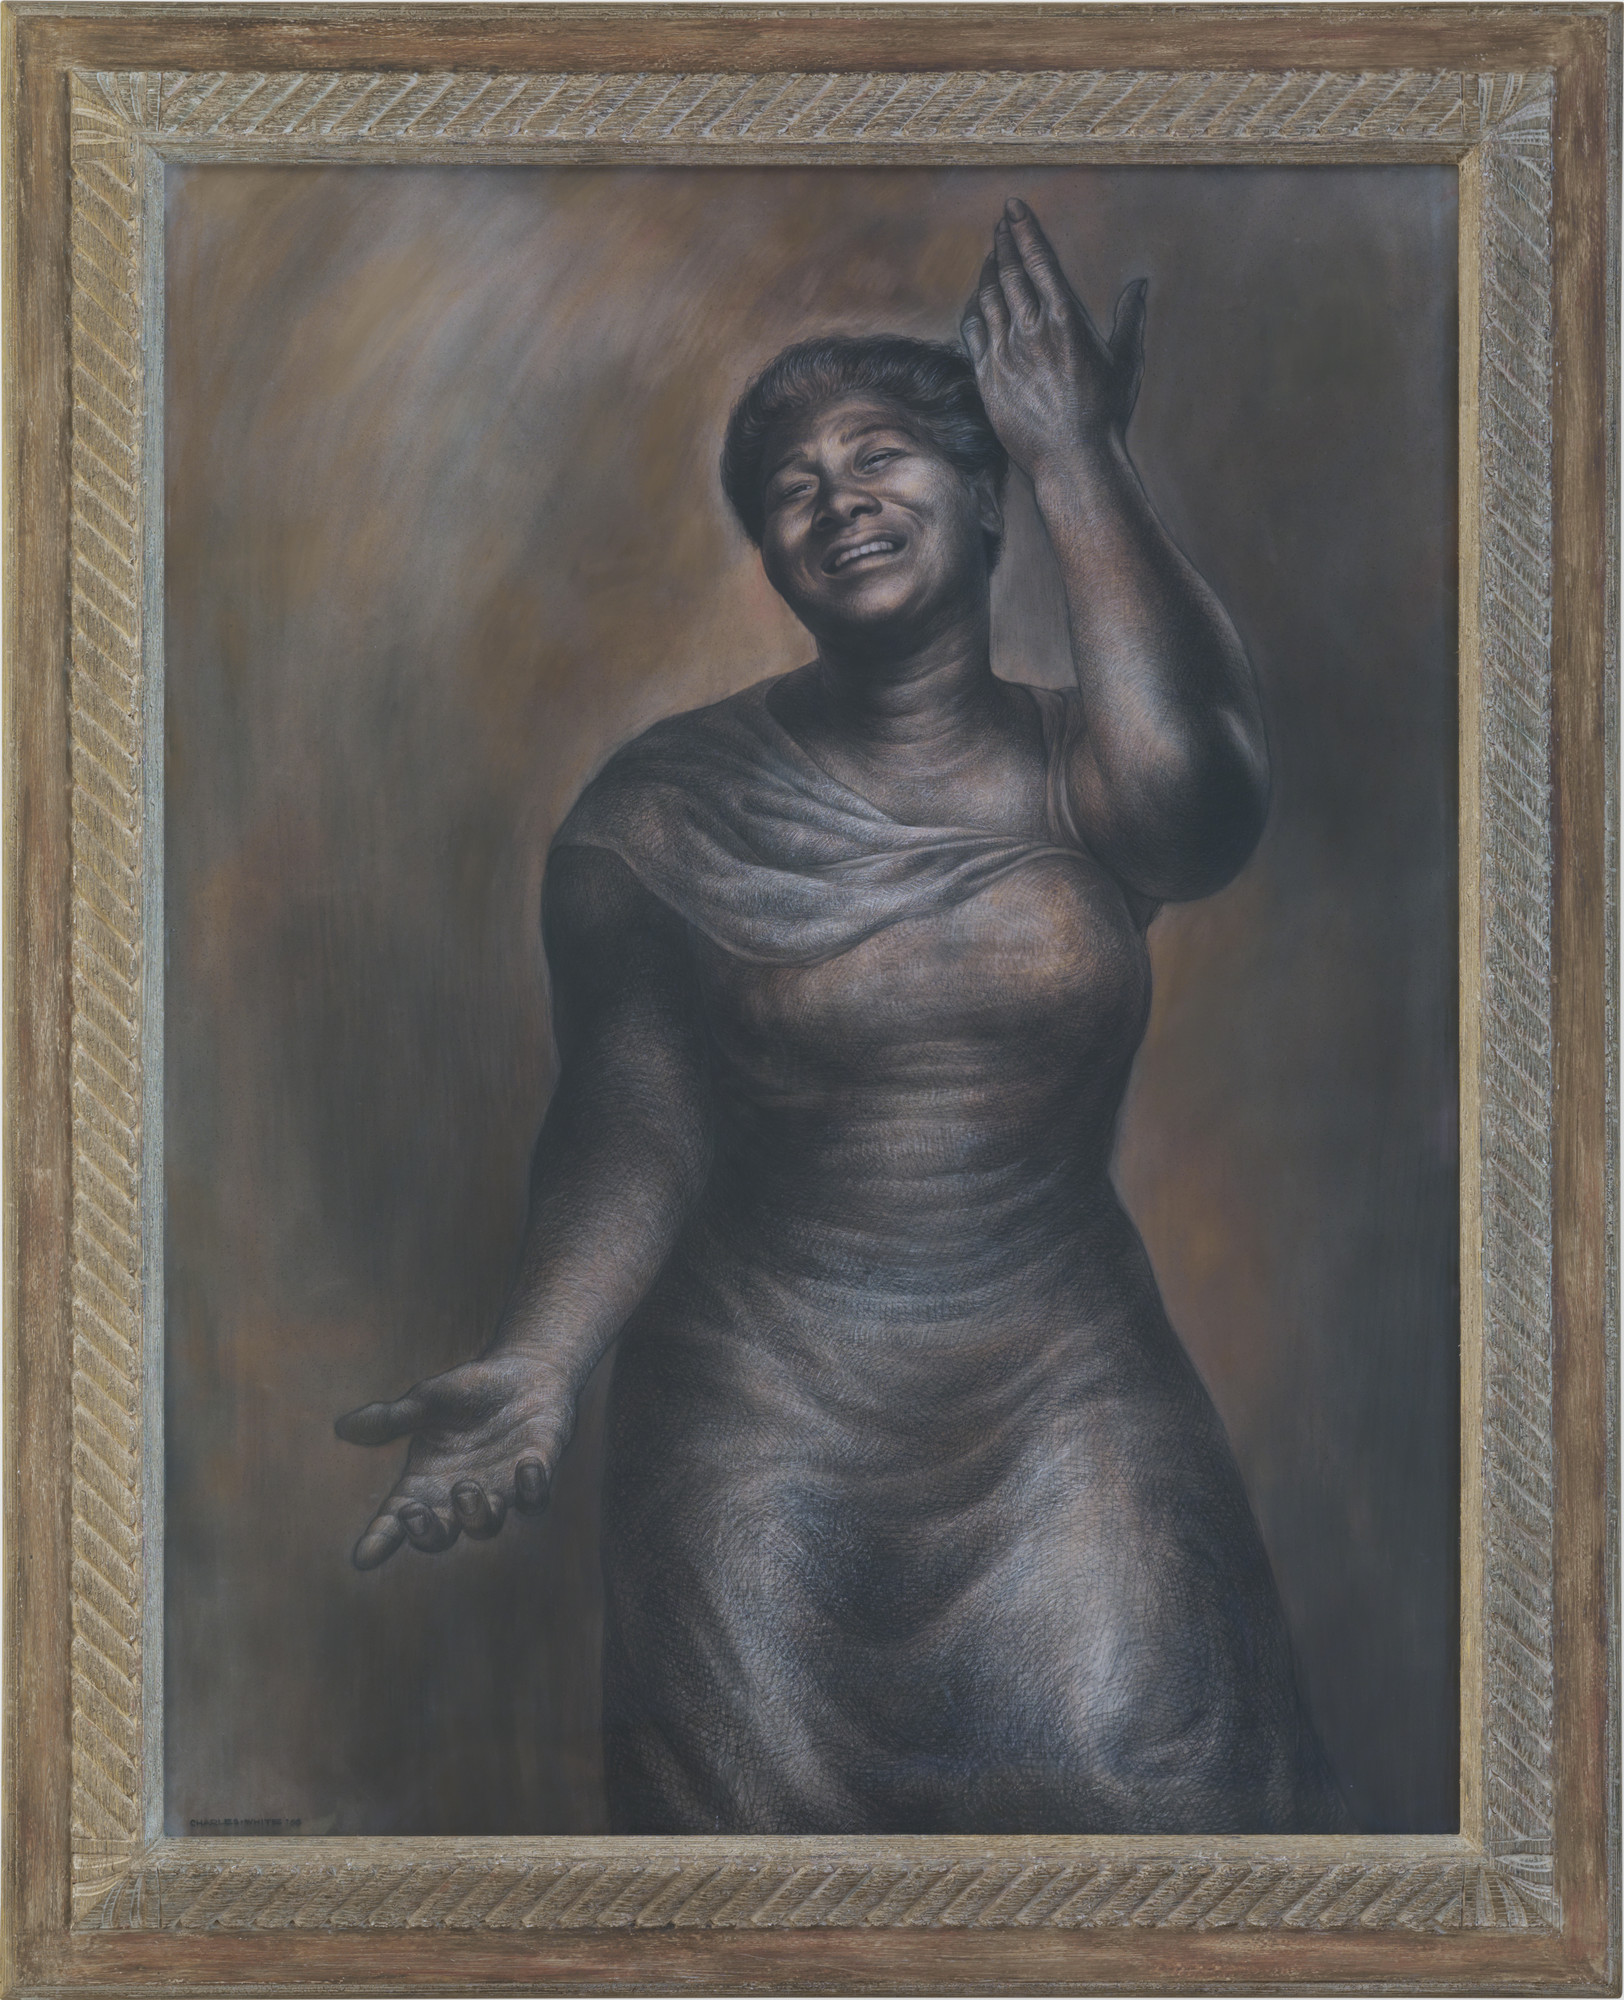 Charles White. _Mahalia_. 1955. Charcoal and Conté crayon on board, 50 x 42" (126.6 x 106.7 cm). Collection Pamela and Harry Belafonte. © The Charles White Archives/ Photo: Christopher Burke Studio